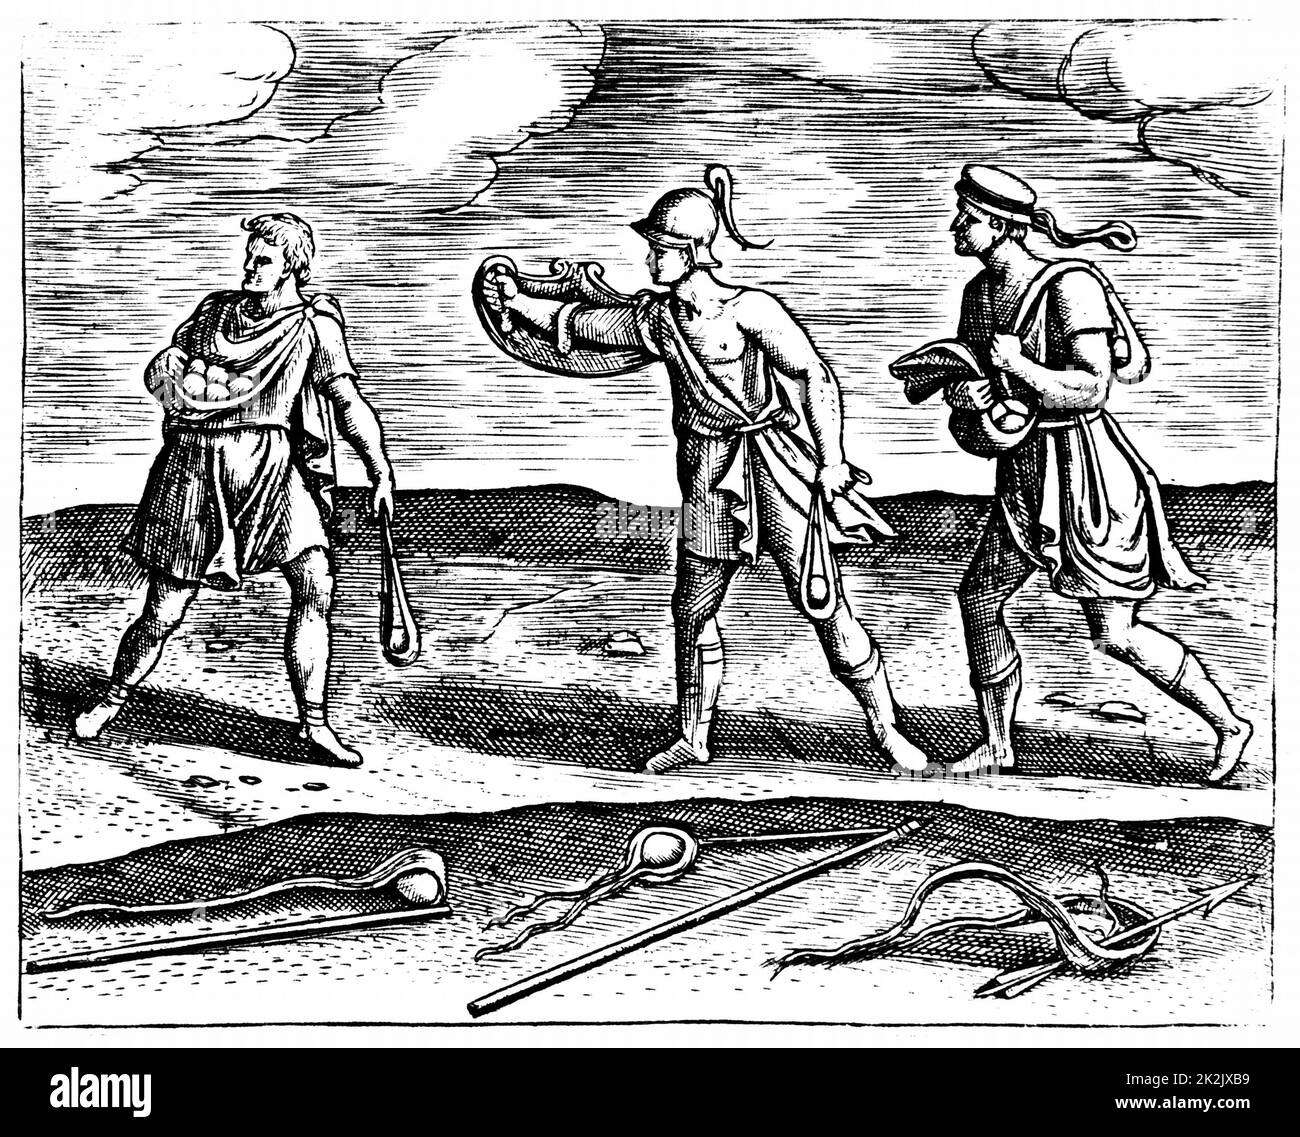 Roman soldiers: Stone slingers and their equipment. Three men all carrying short hand slings, while on ground are sling sticks which gave missiles greater impetus. From Justus Lipsius 'Poliorceticon…' Antwerp 1605. Copperplate engraving Stock Photo